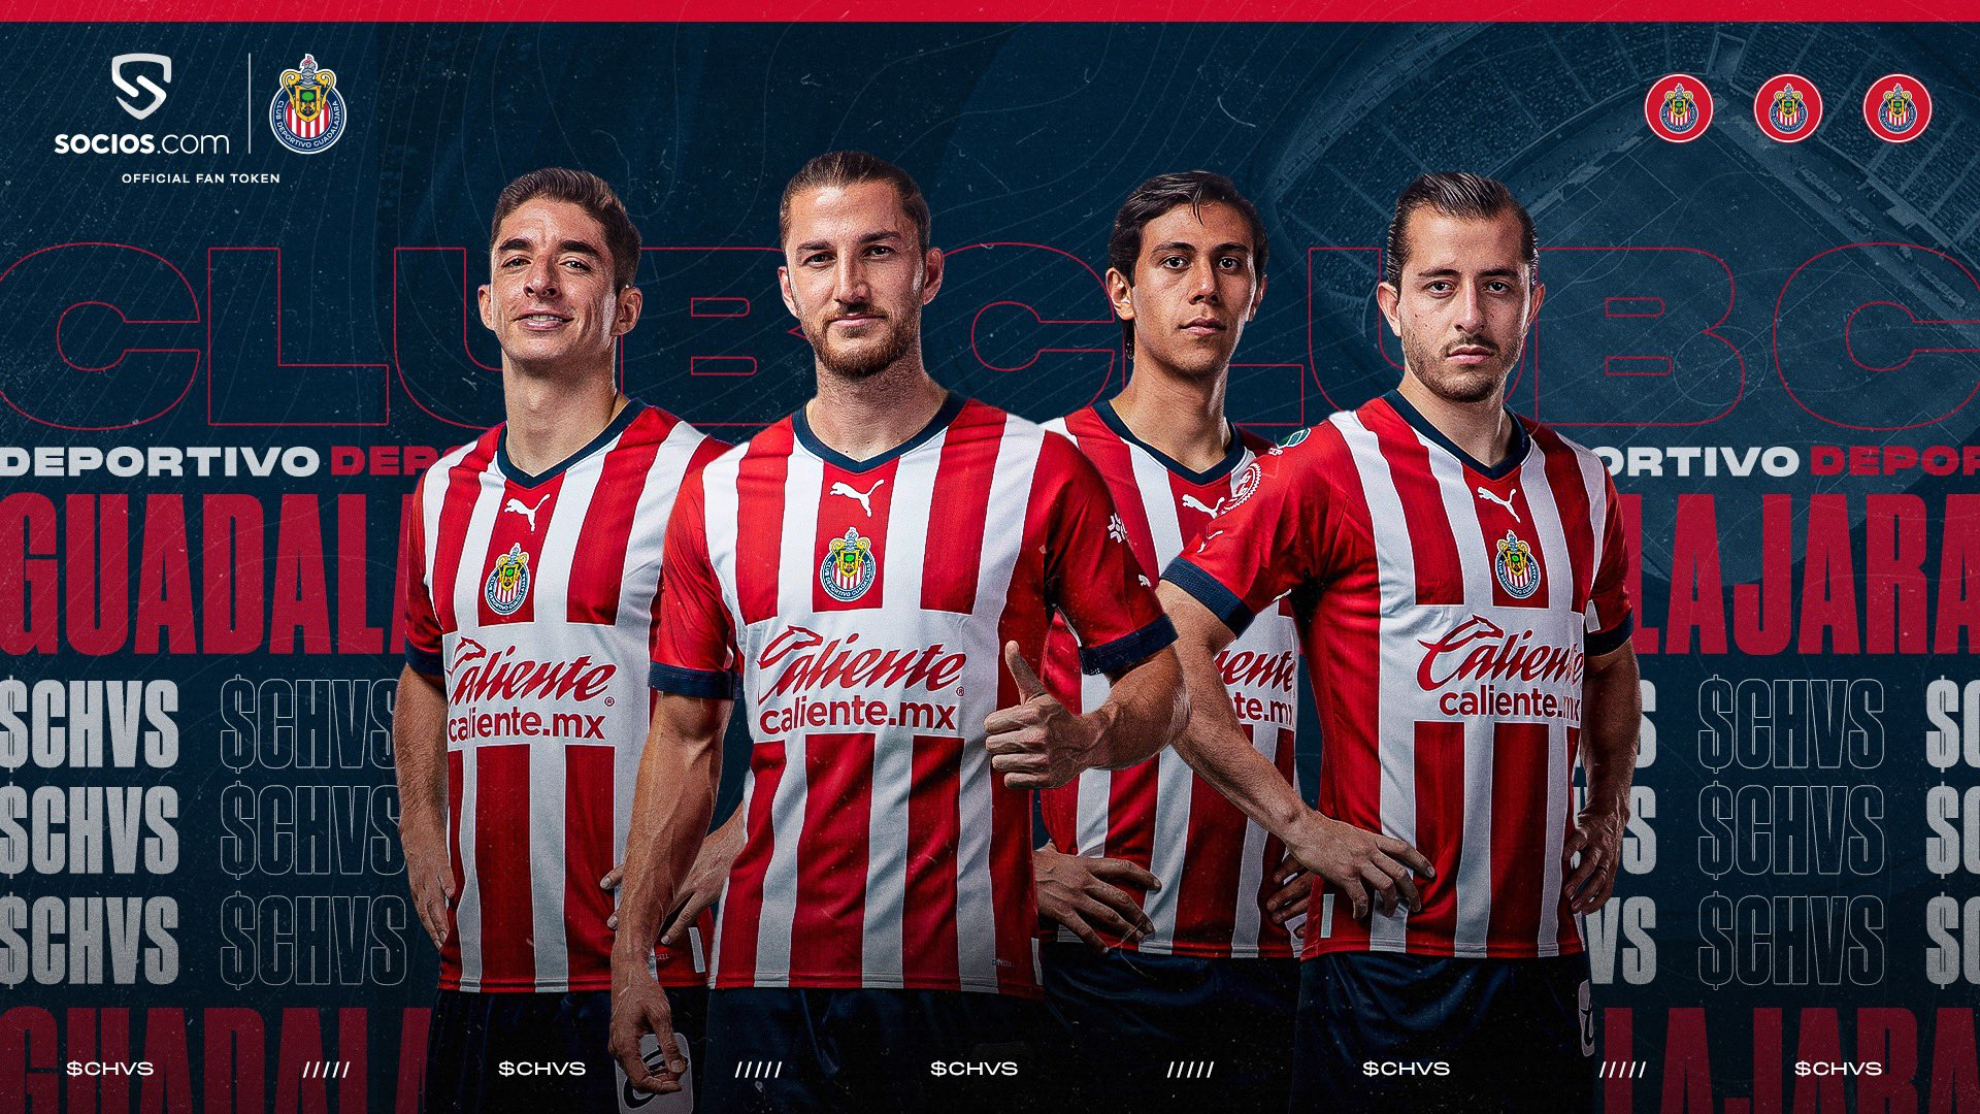 Chivas joins other big clubs and launches Fan Token with Socios.com